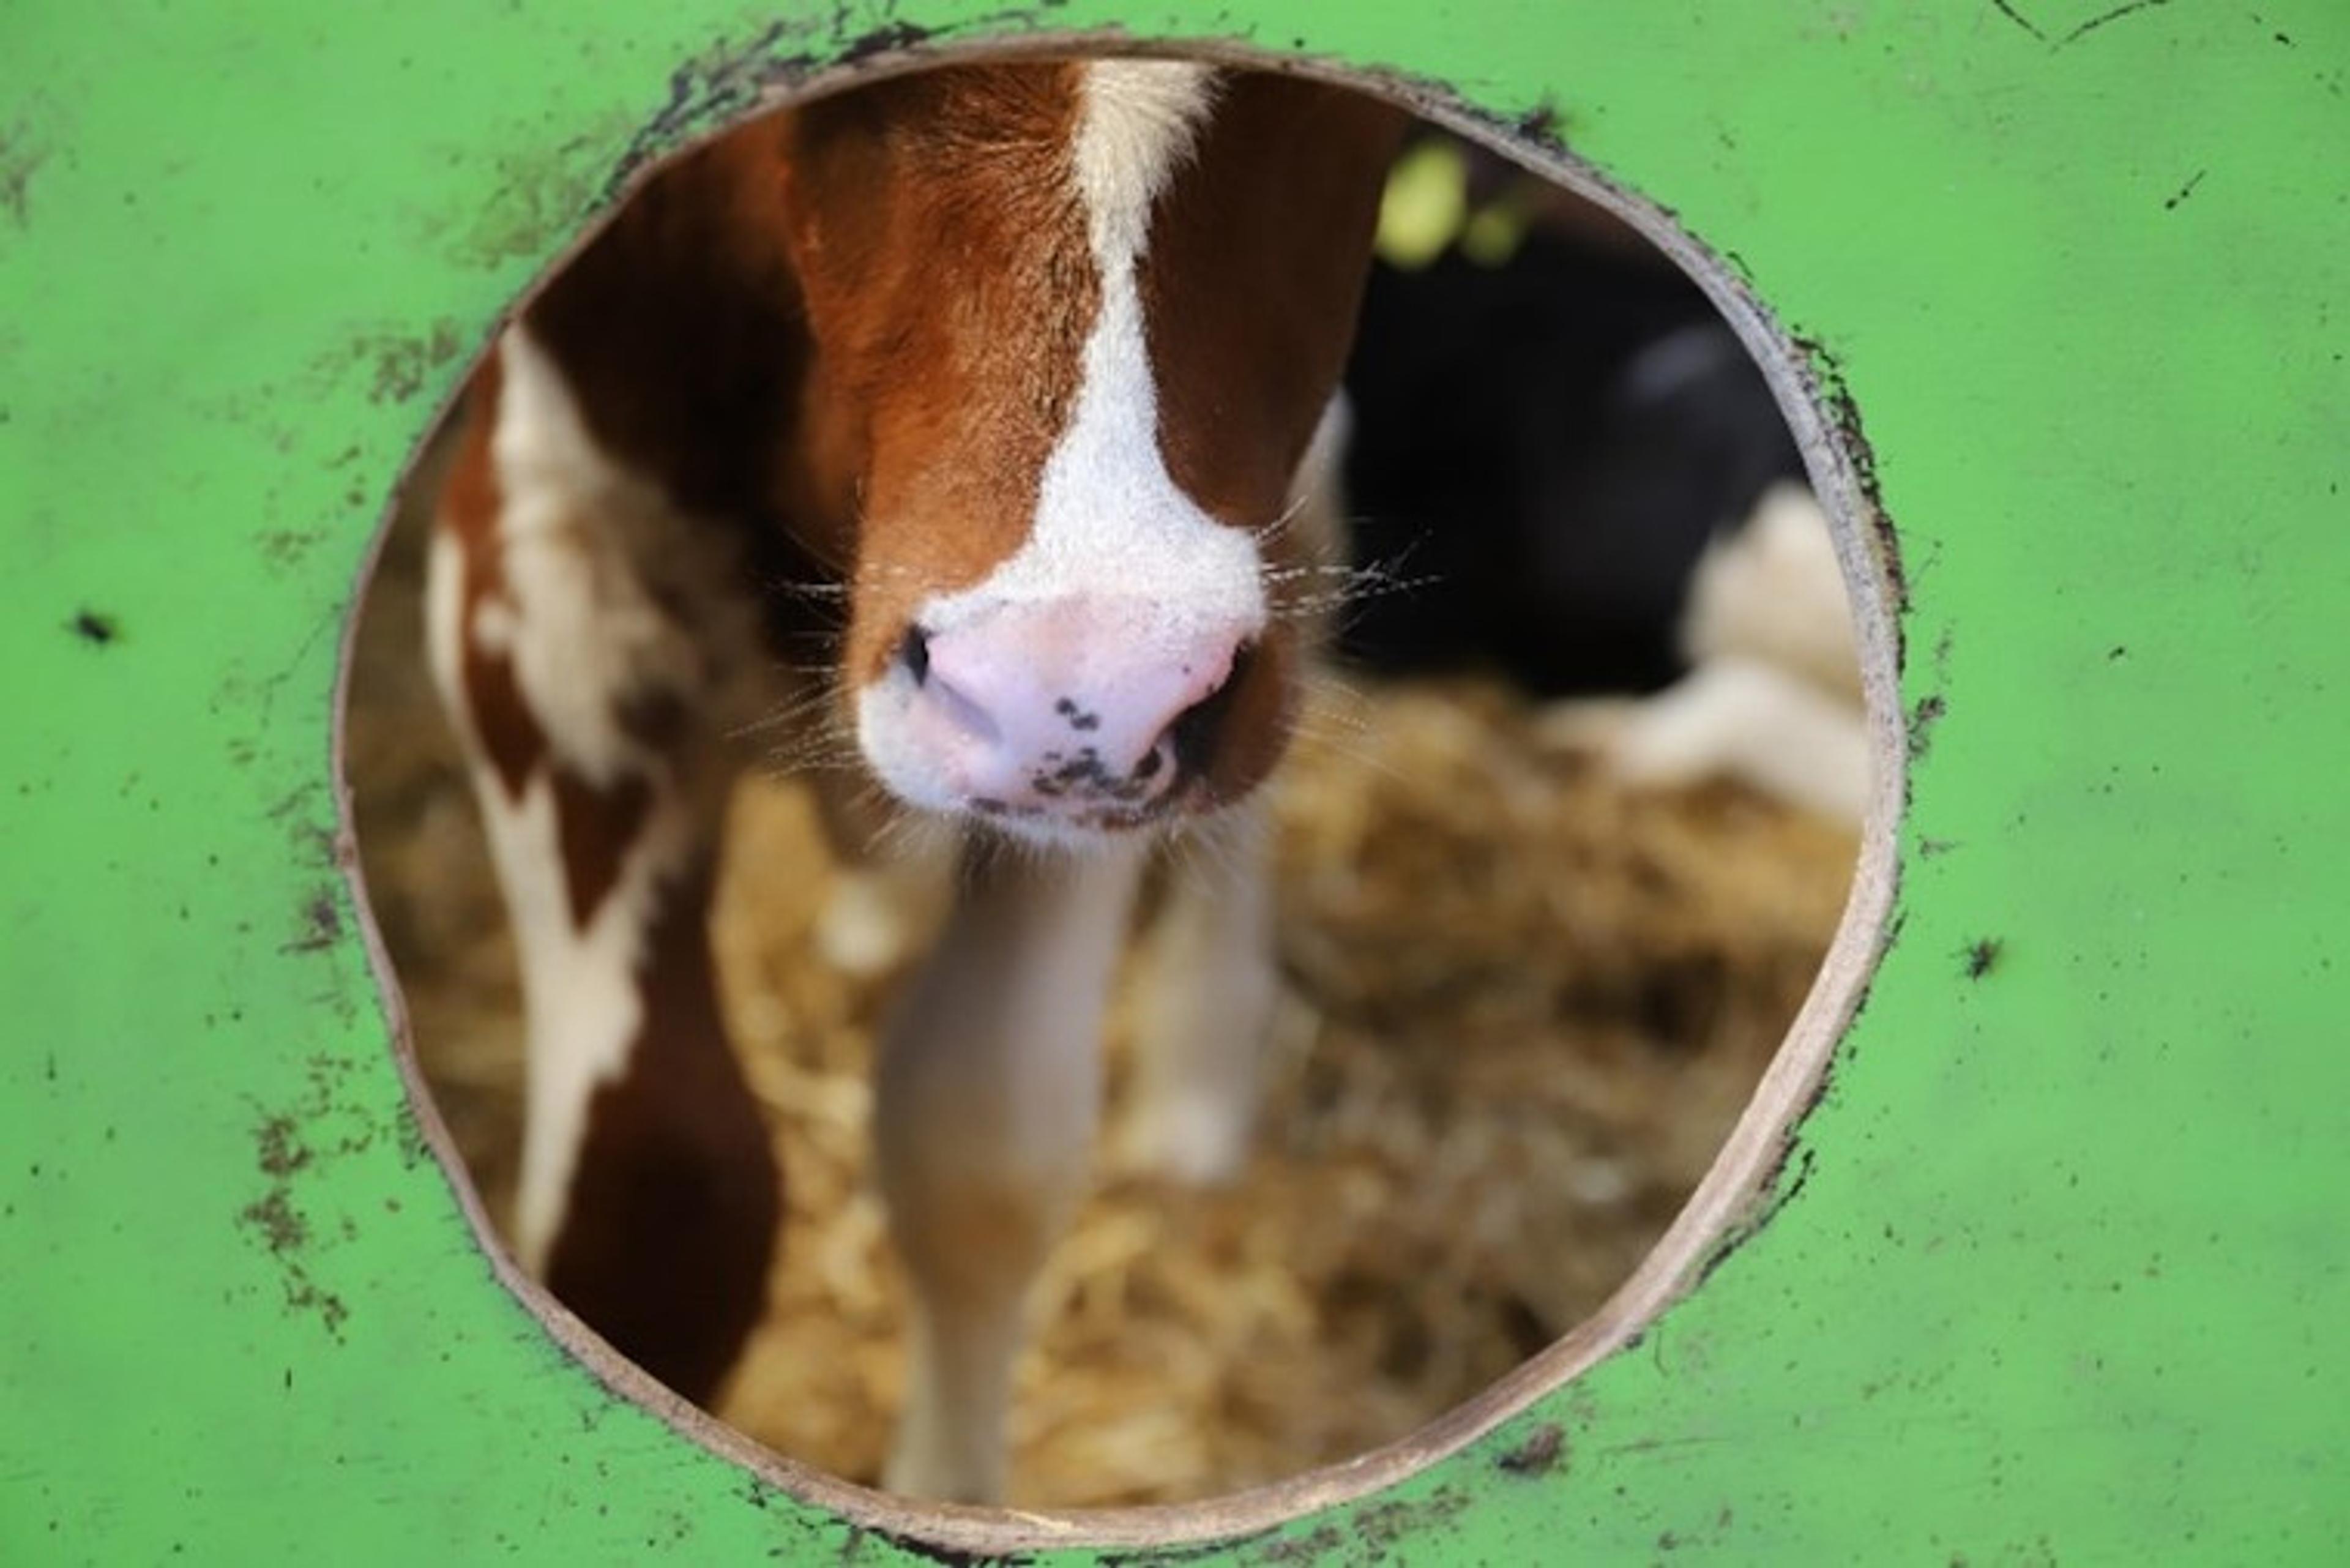 A calf we see trough a cicle (green) and we do not see the eyes. The calf is braun and white in holstein style.